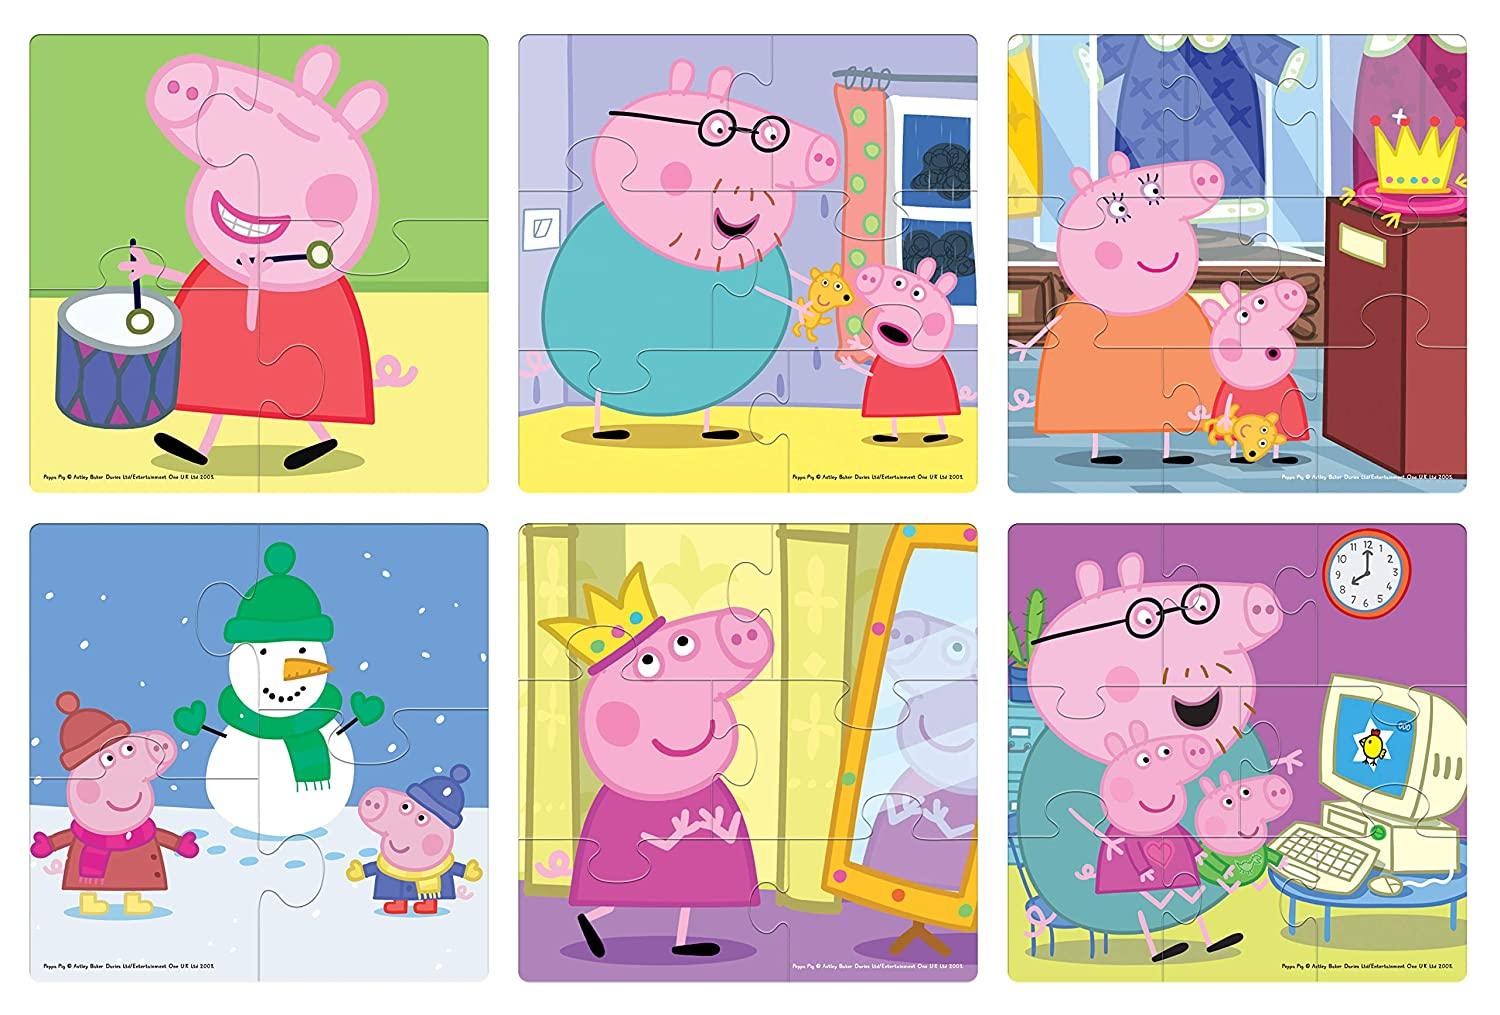 Frank Peppa Pig - 6 In 1 Puzzle For 3 Year Old Kids And Above